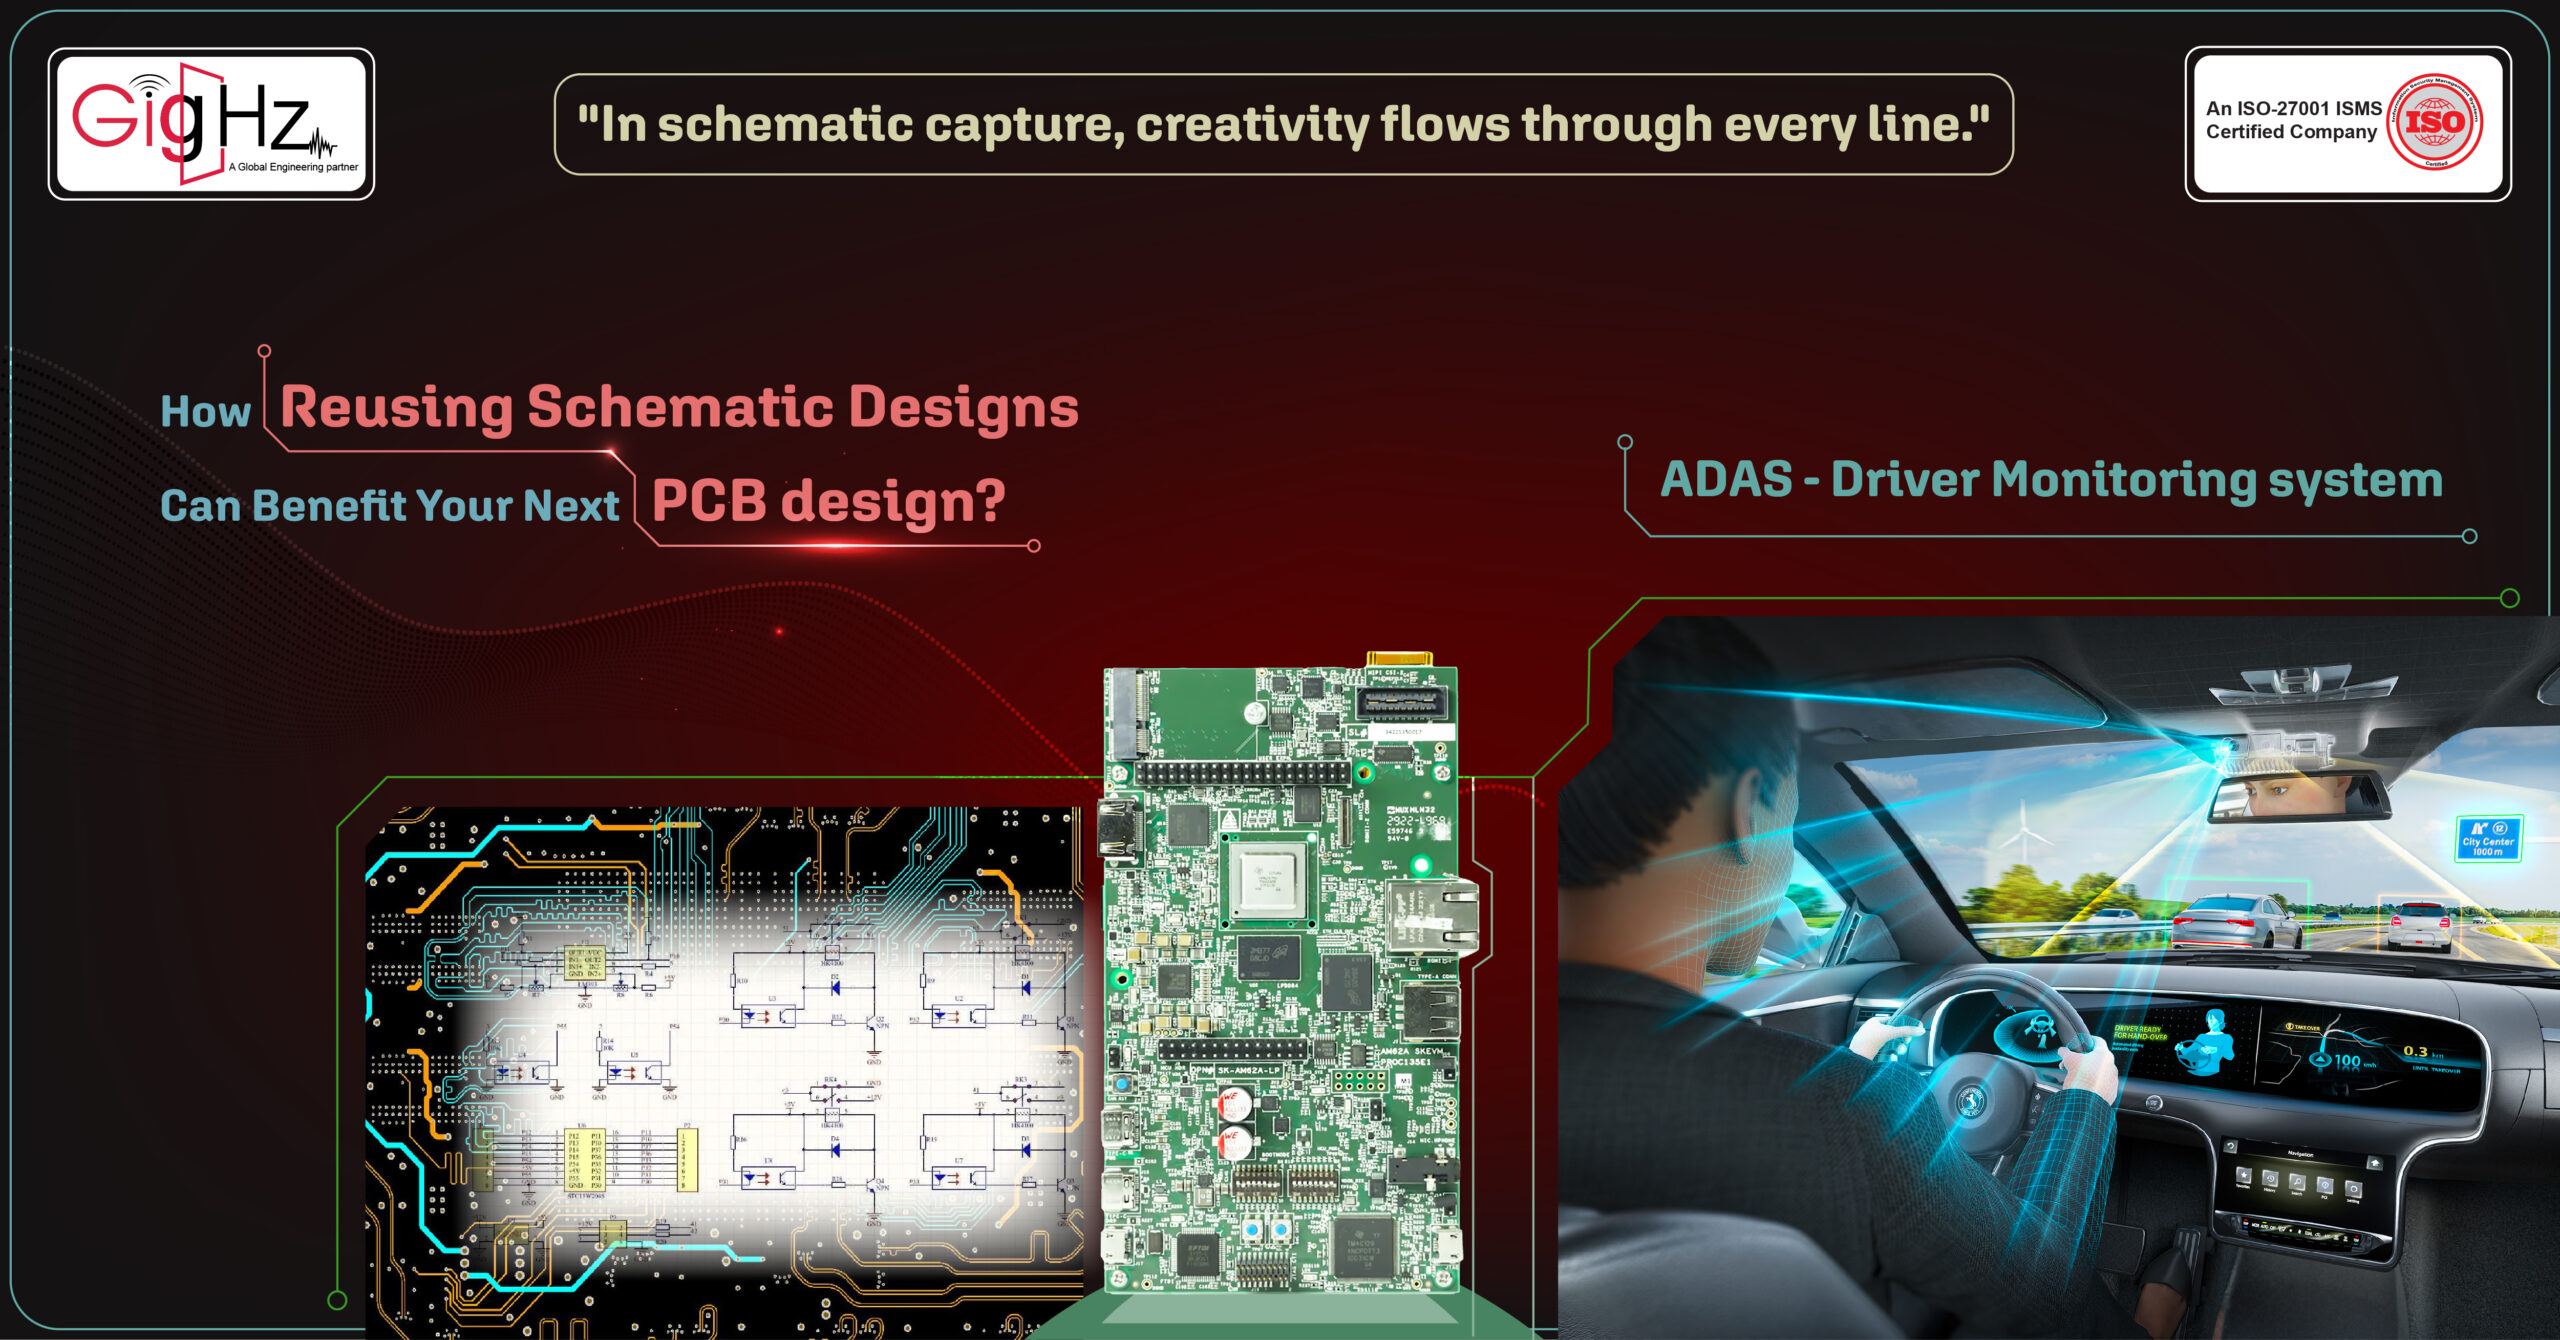 How Reusing Schematic Designs Can Benefit Your Next PCB design?